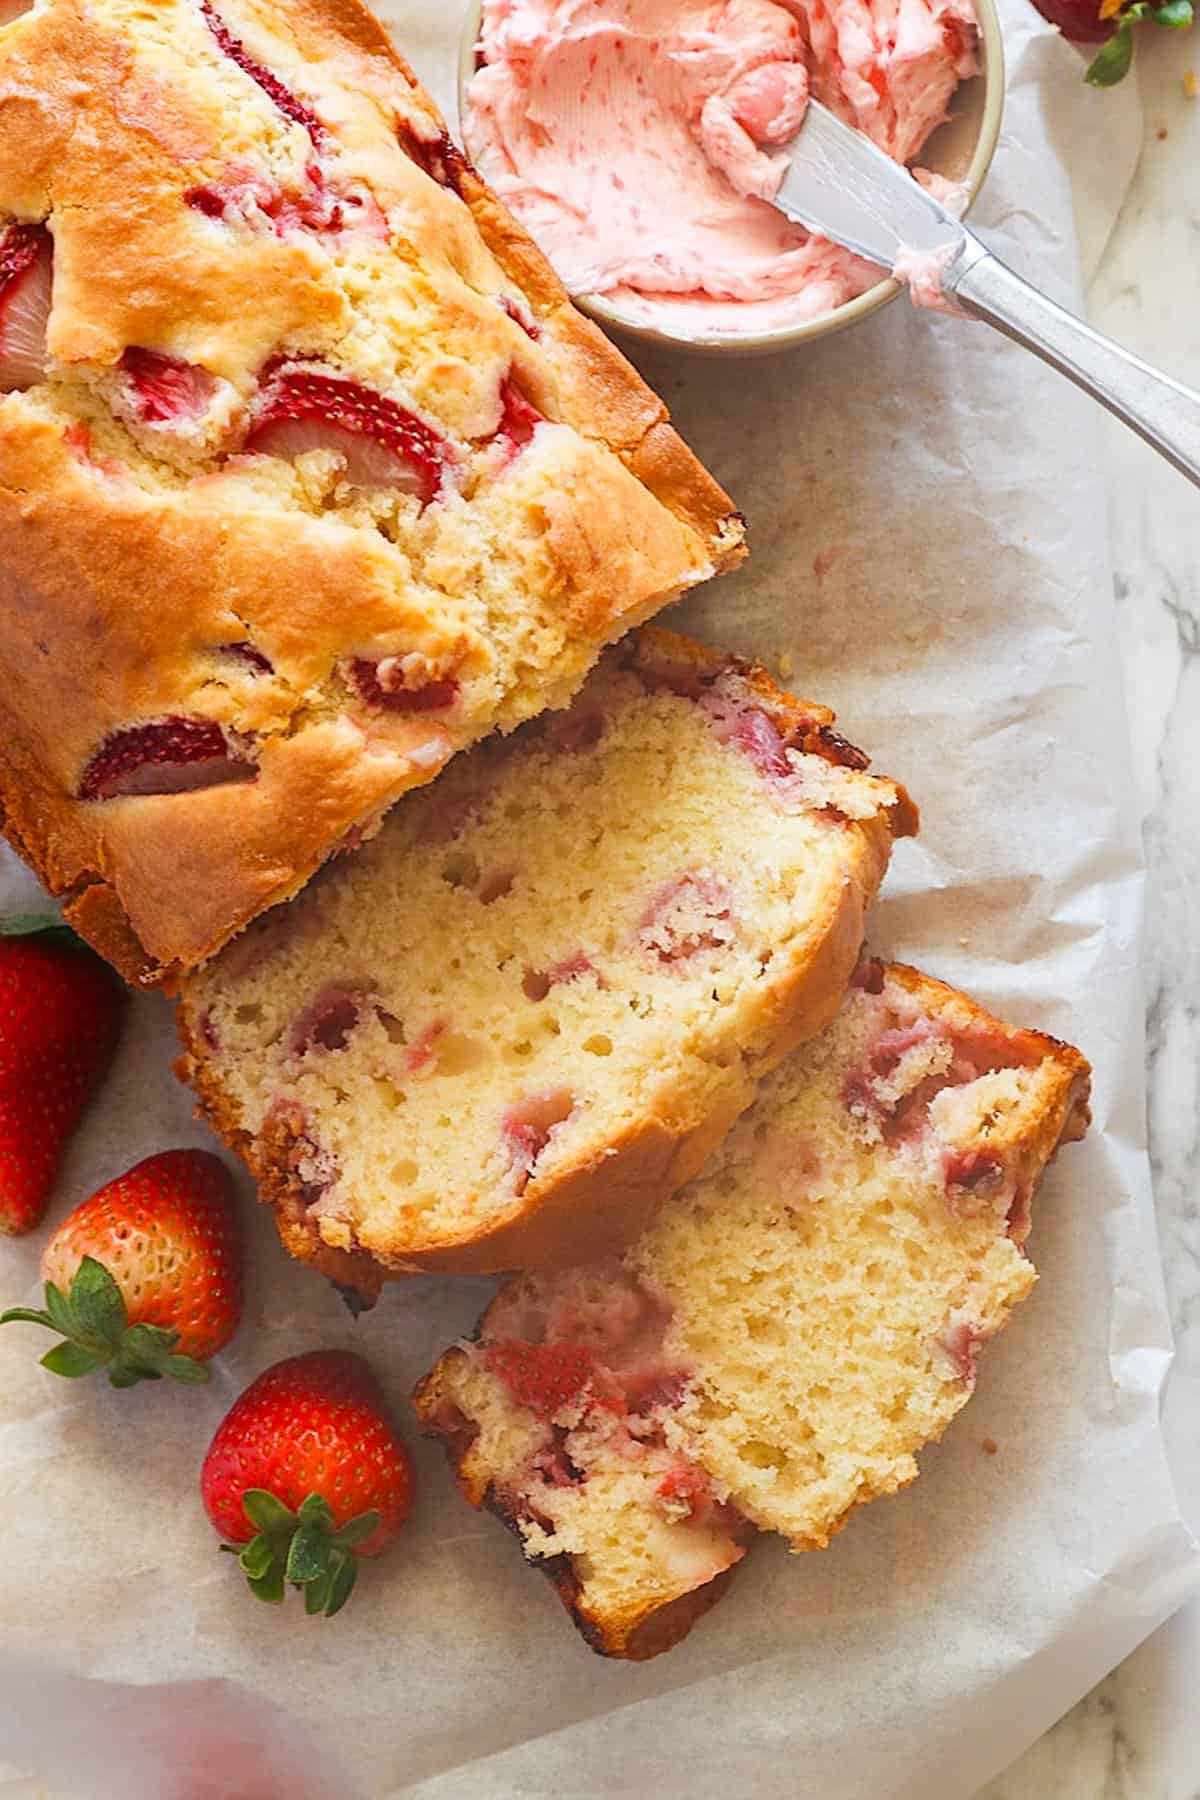 Sliced strawberry bread ready to be slathered with strawberry cream cheese